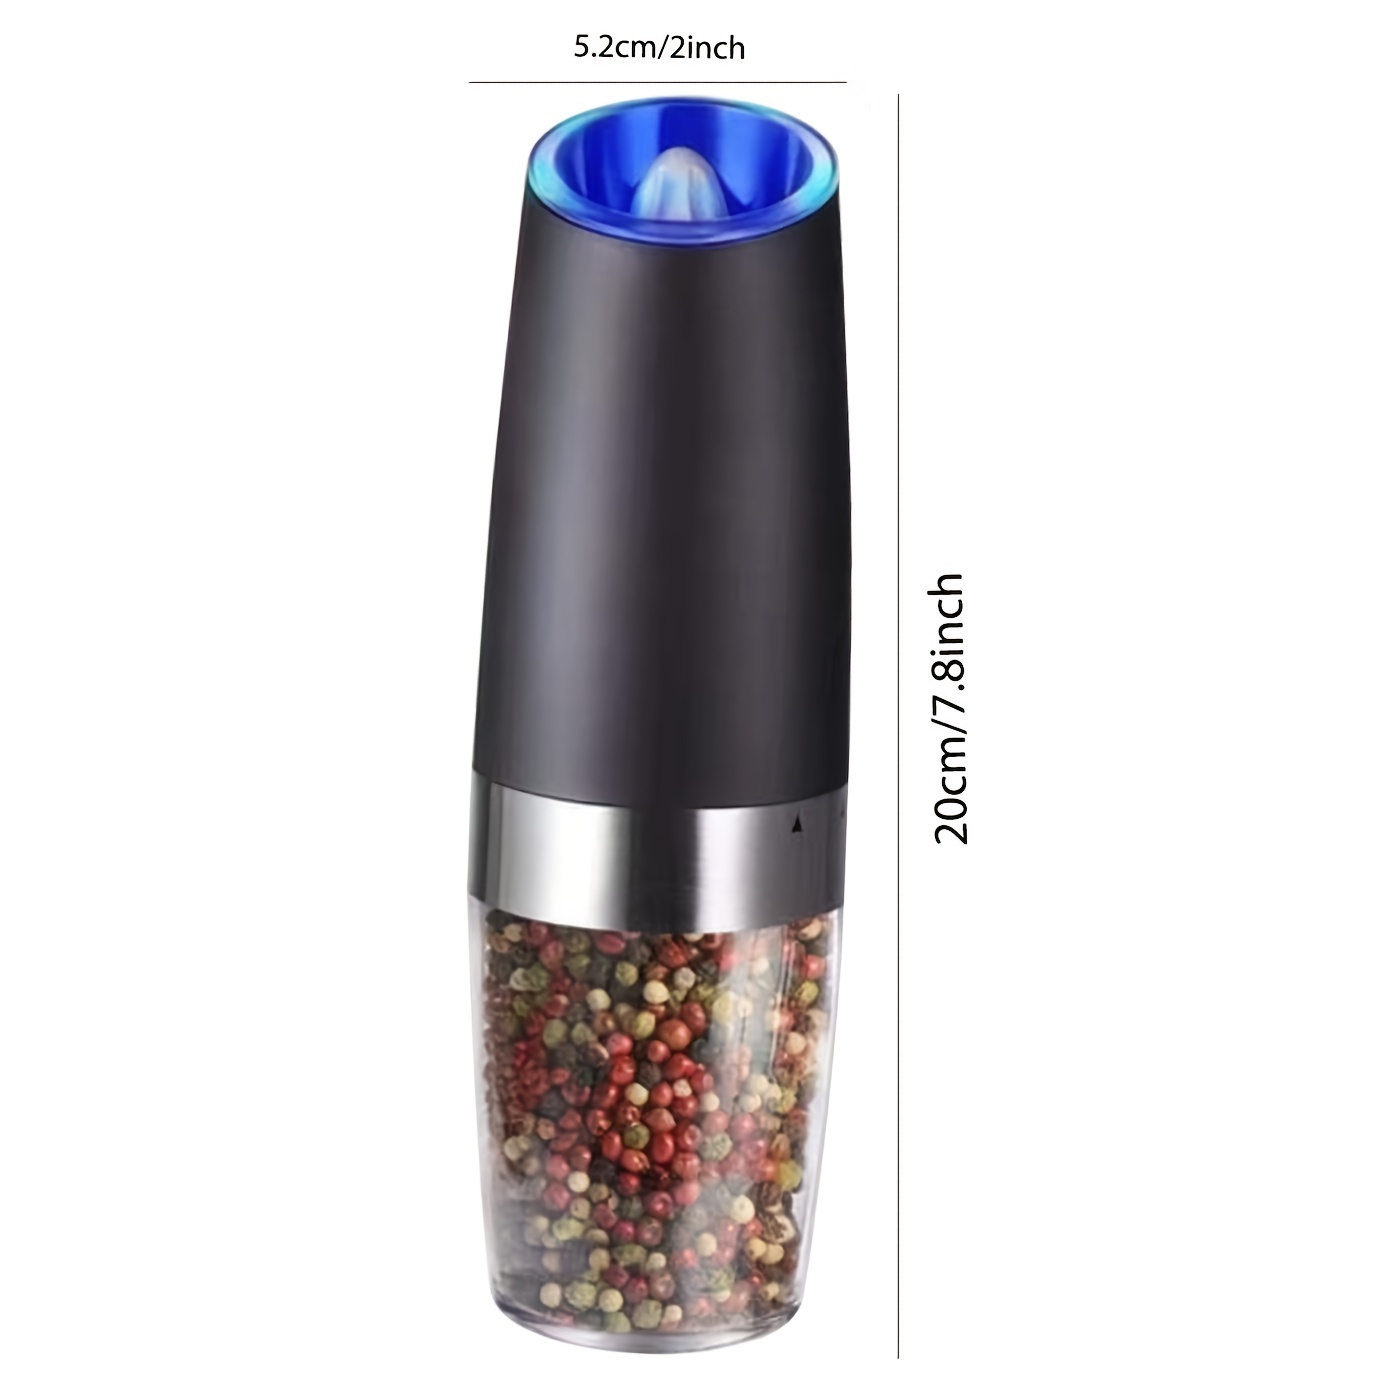 Gravity Electric Pepper and Salt Grinder Set [White Light] Battery Operated Automatic Pepper and Salt Mills with Light,Adjustable Coarseness,One